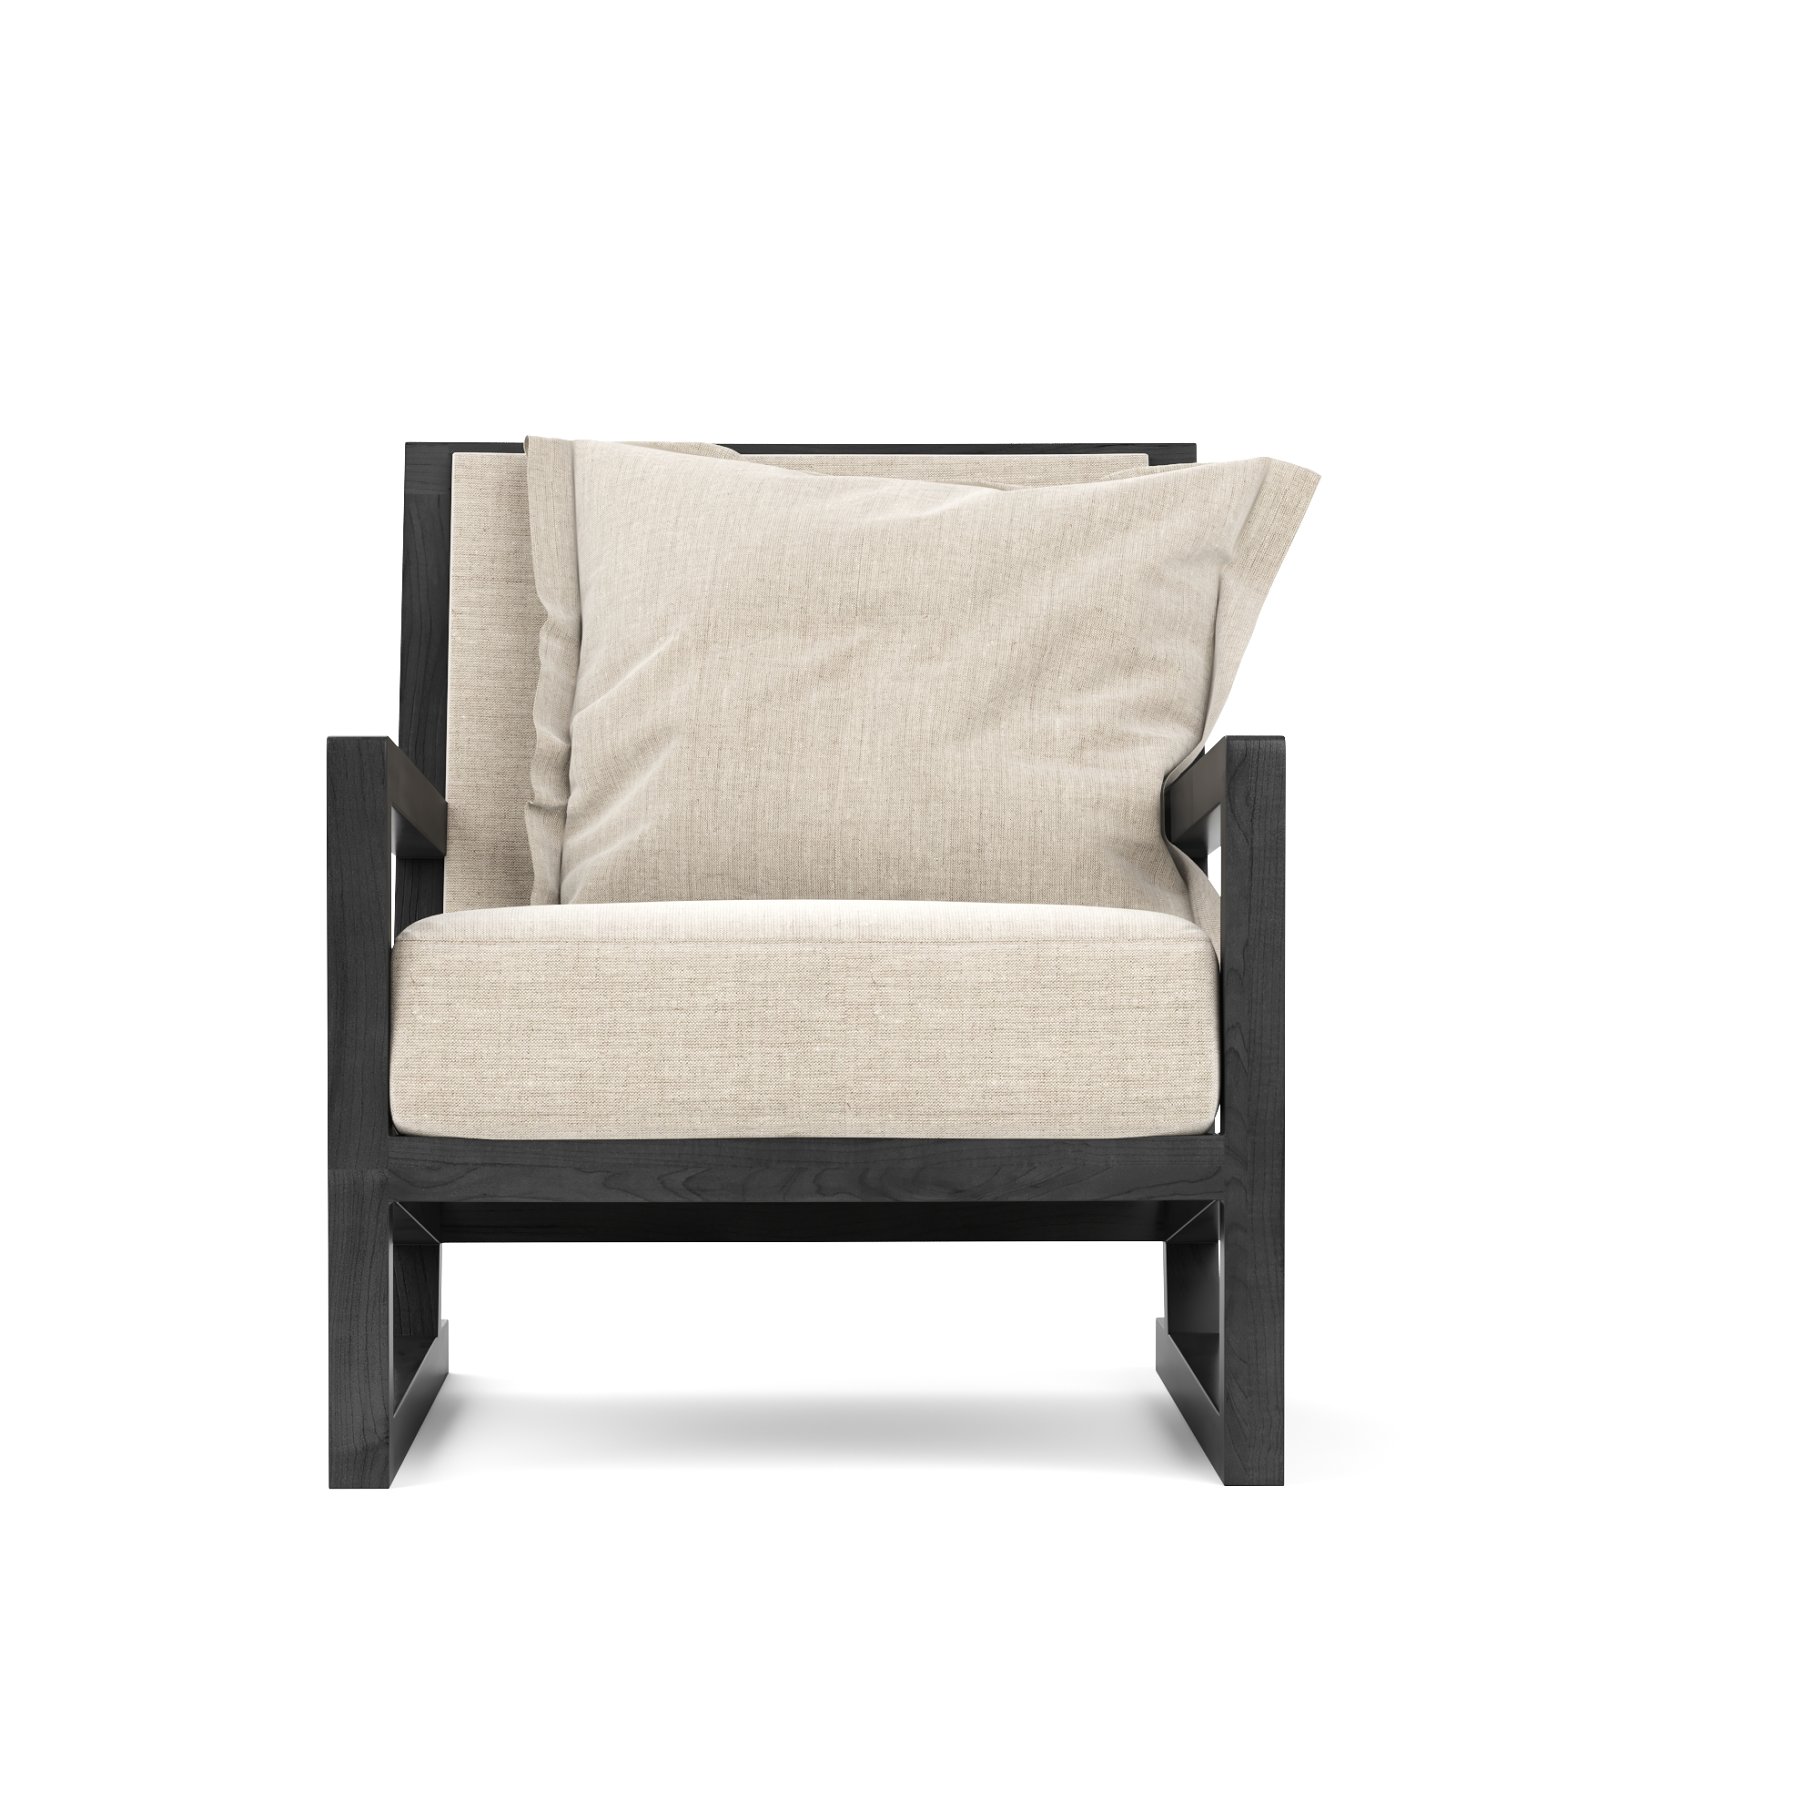 Rendering of a beautiful 3d model armchair front view